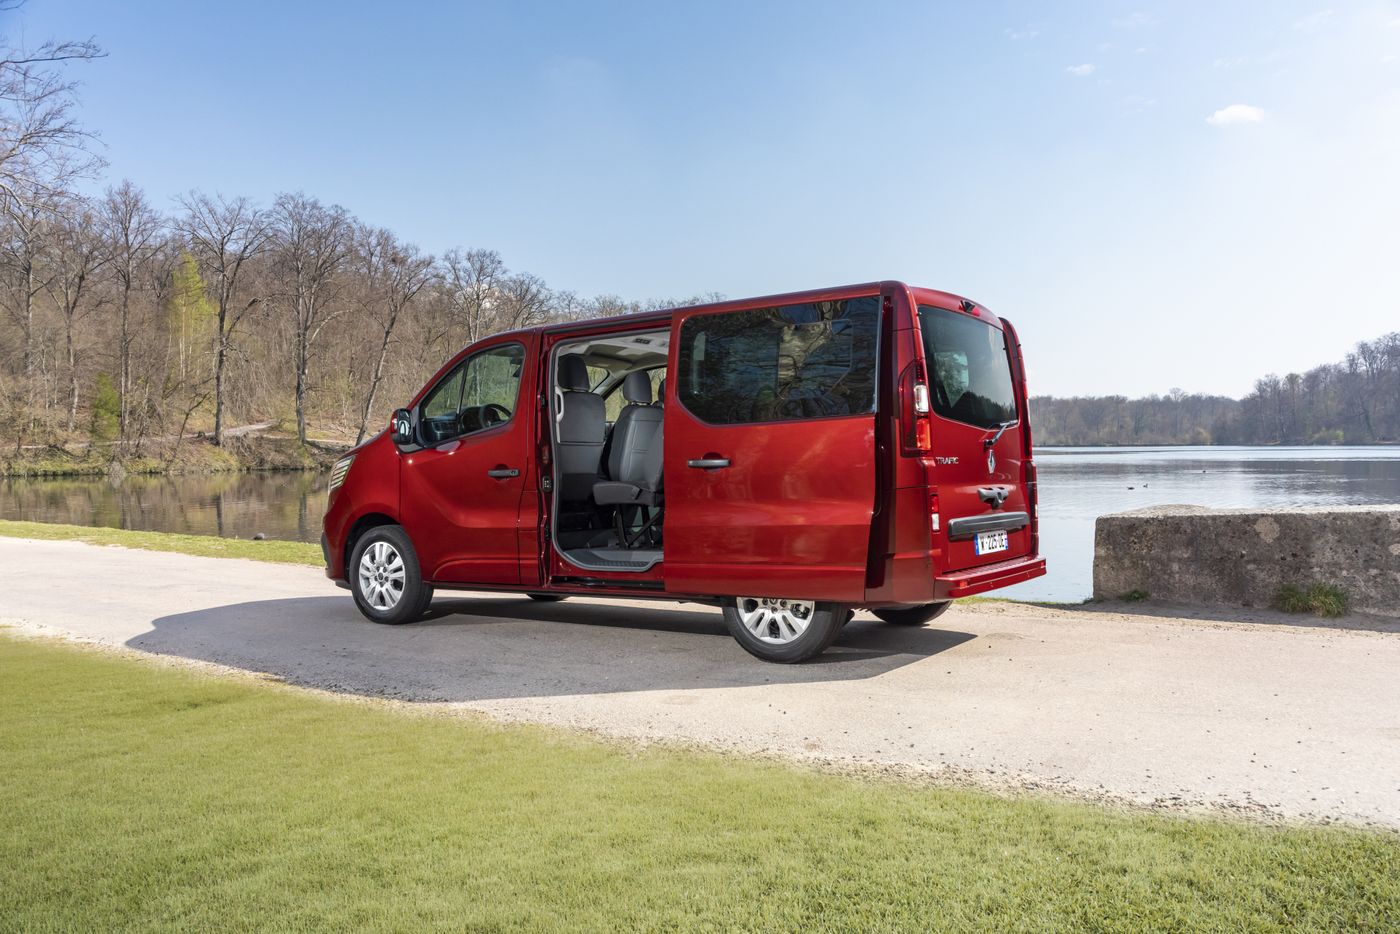 2021 - New Renault Trafic Combi - Tests drive (2)